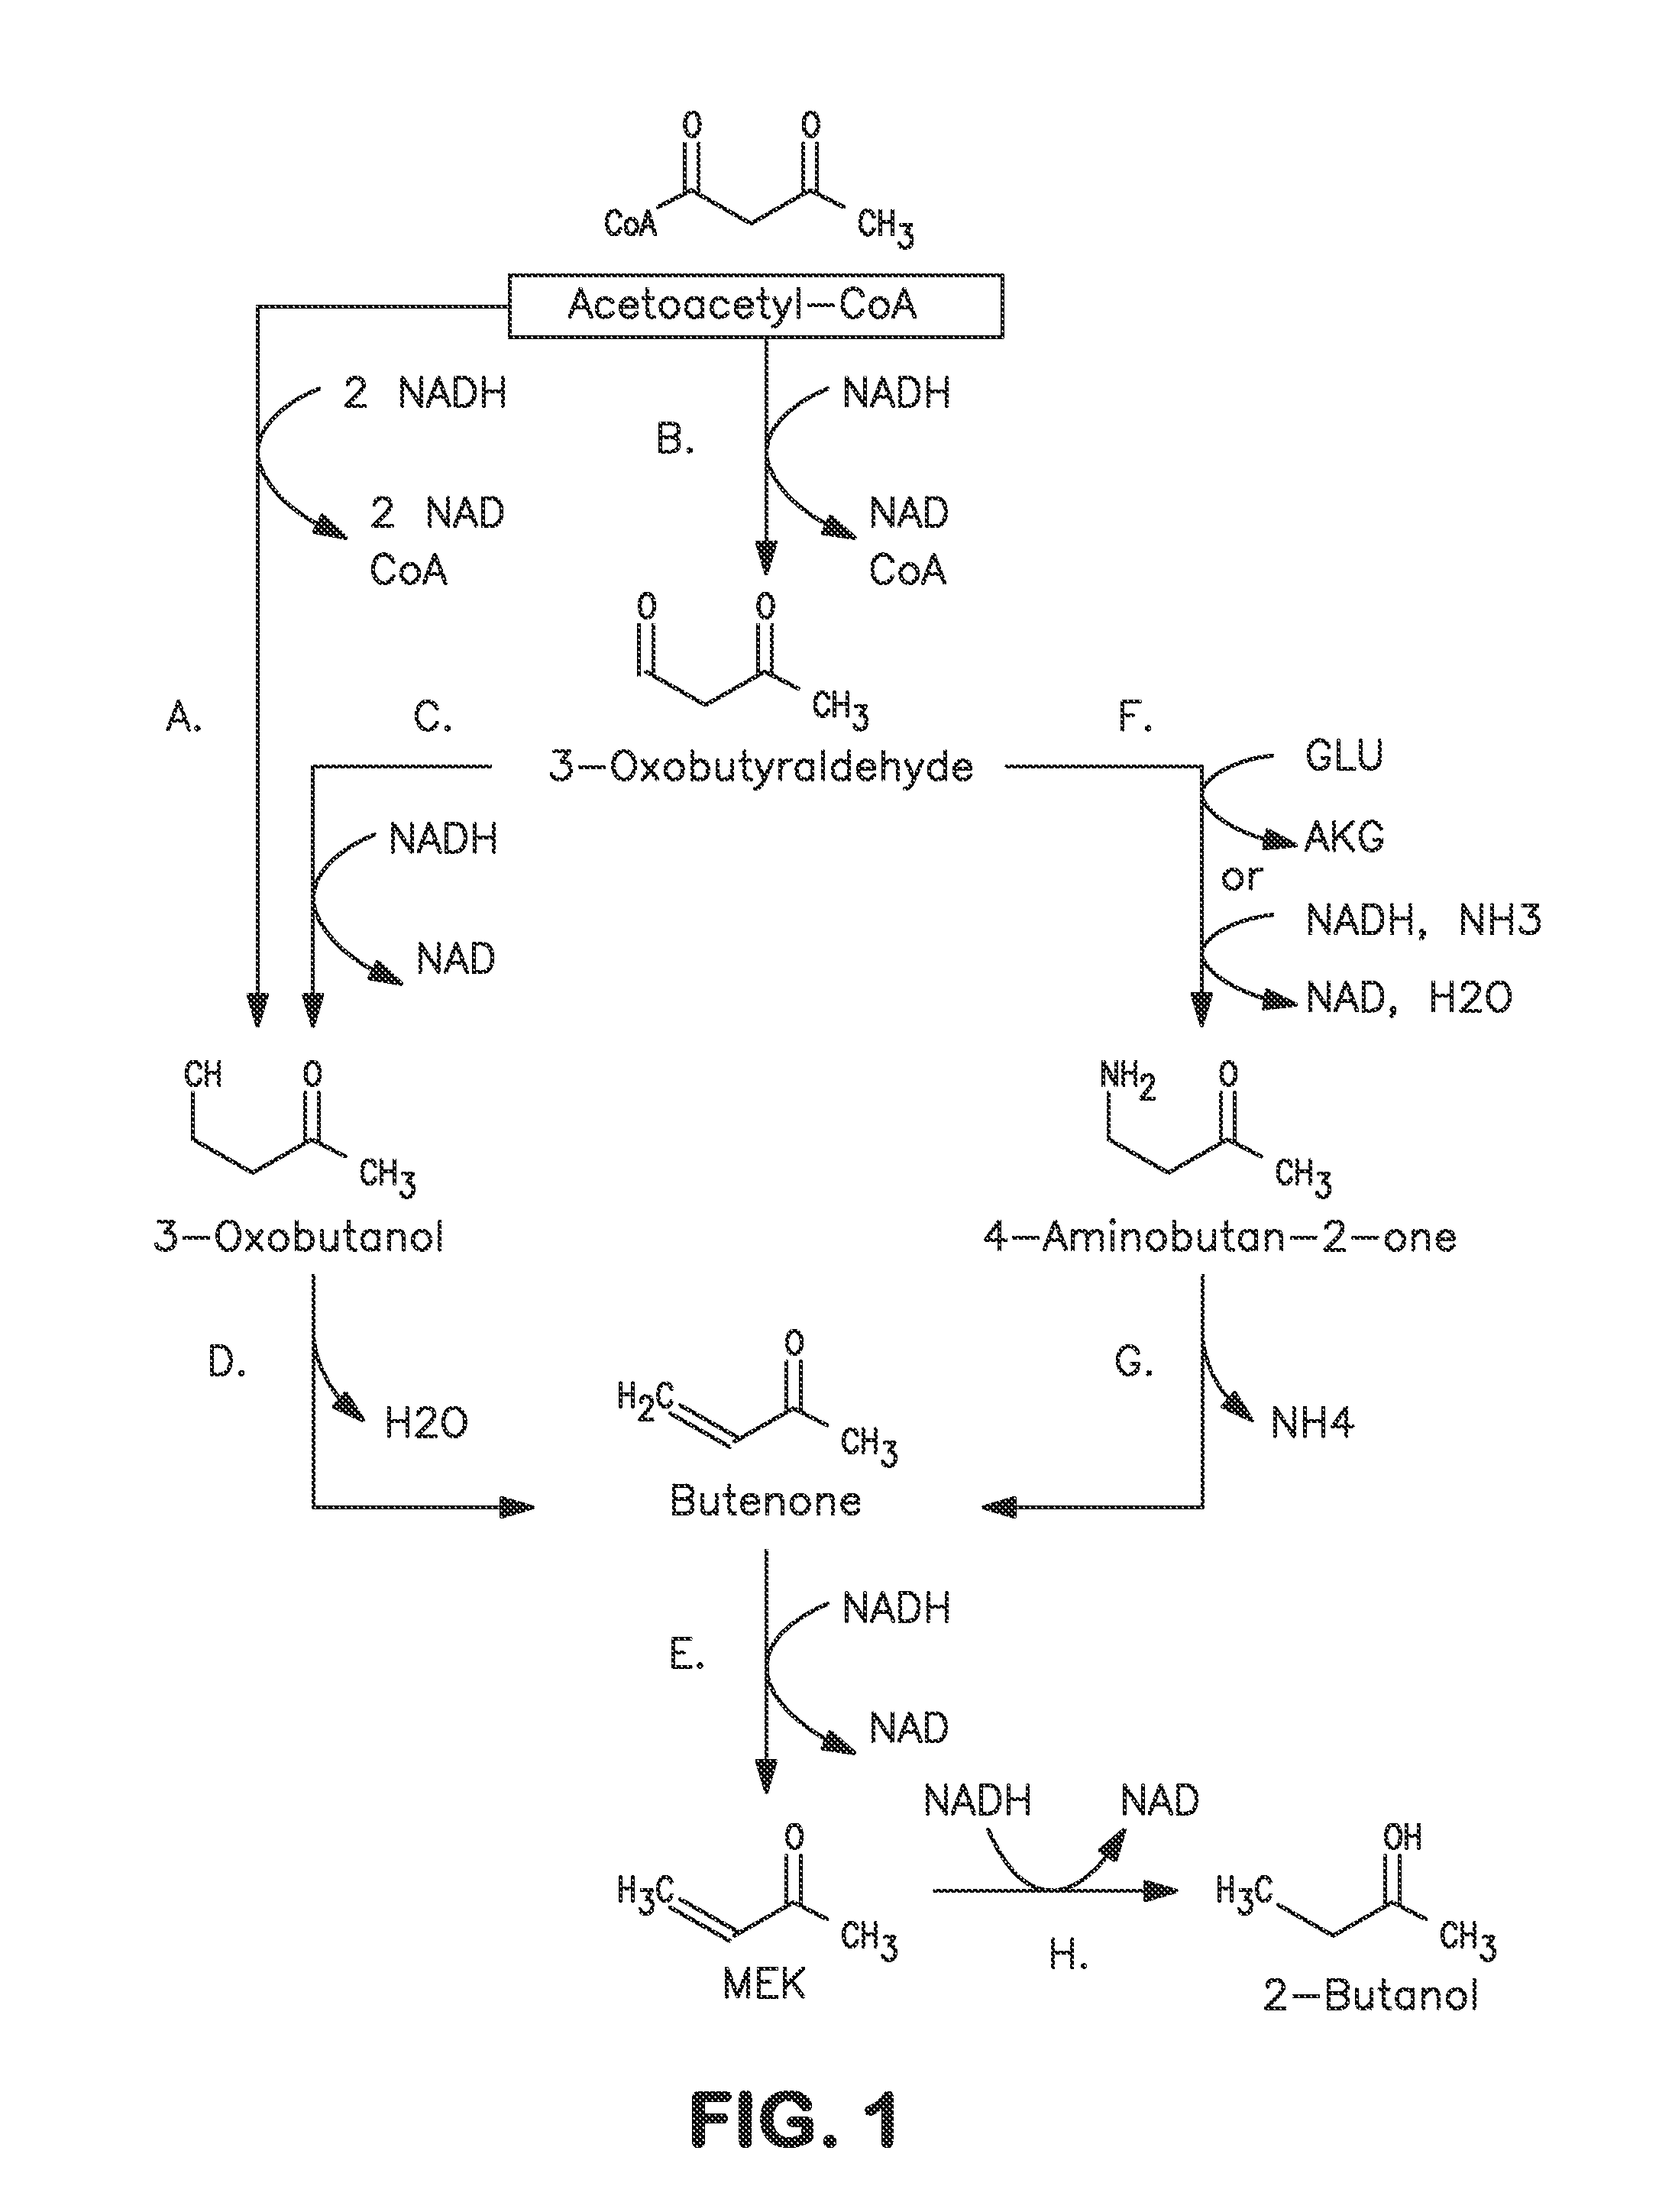 Microorganisms and methods for carbon-efficient biosynthesis of mek and 2-butanol